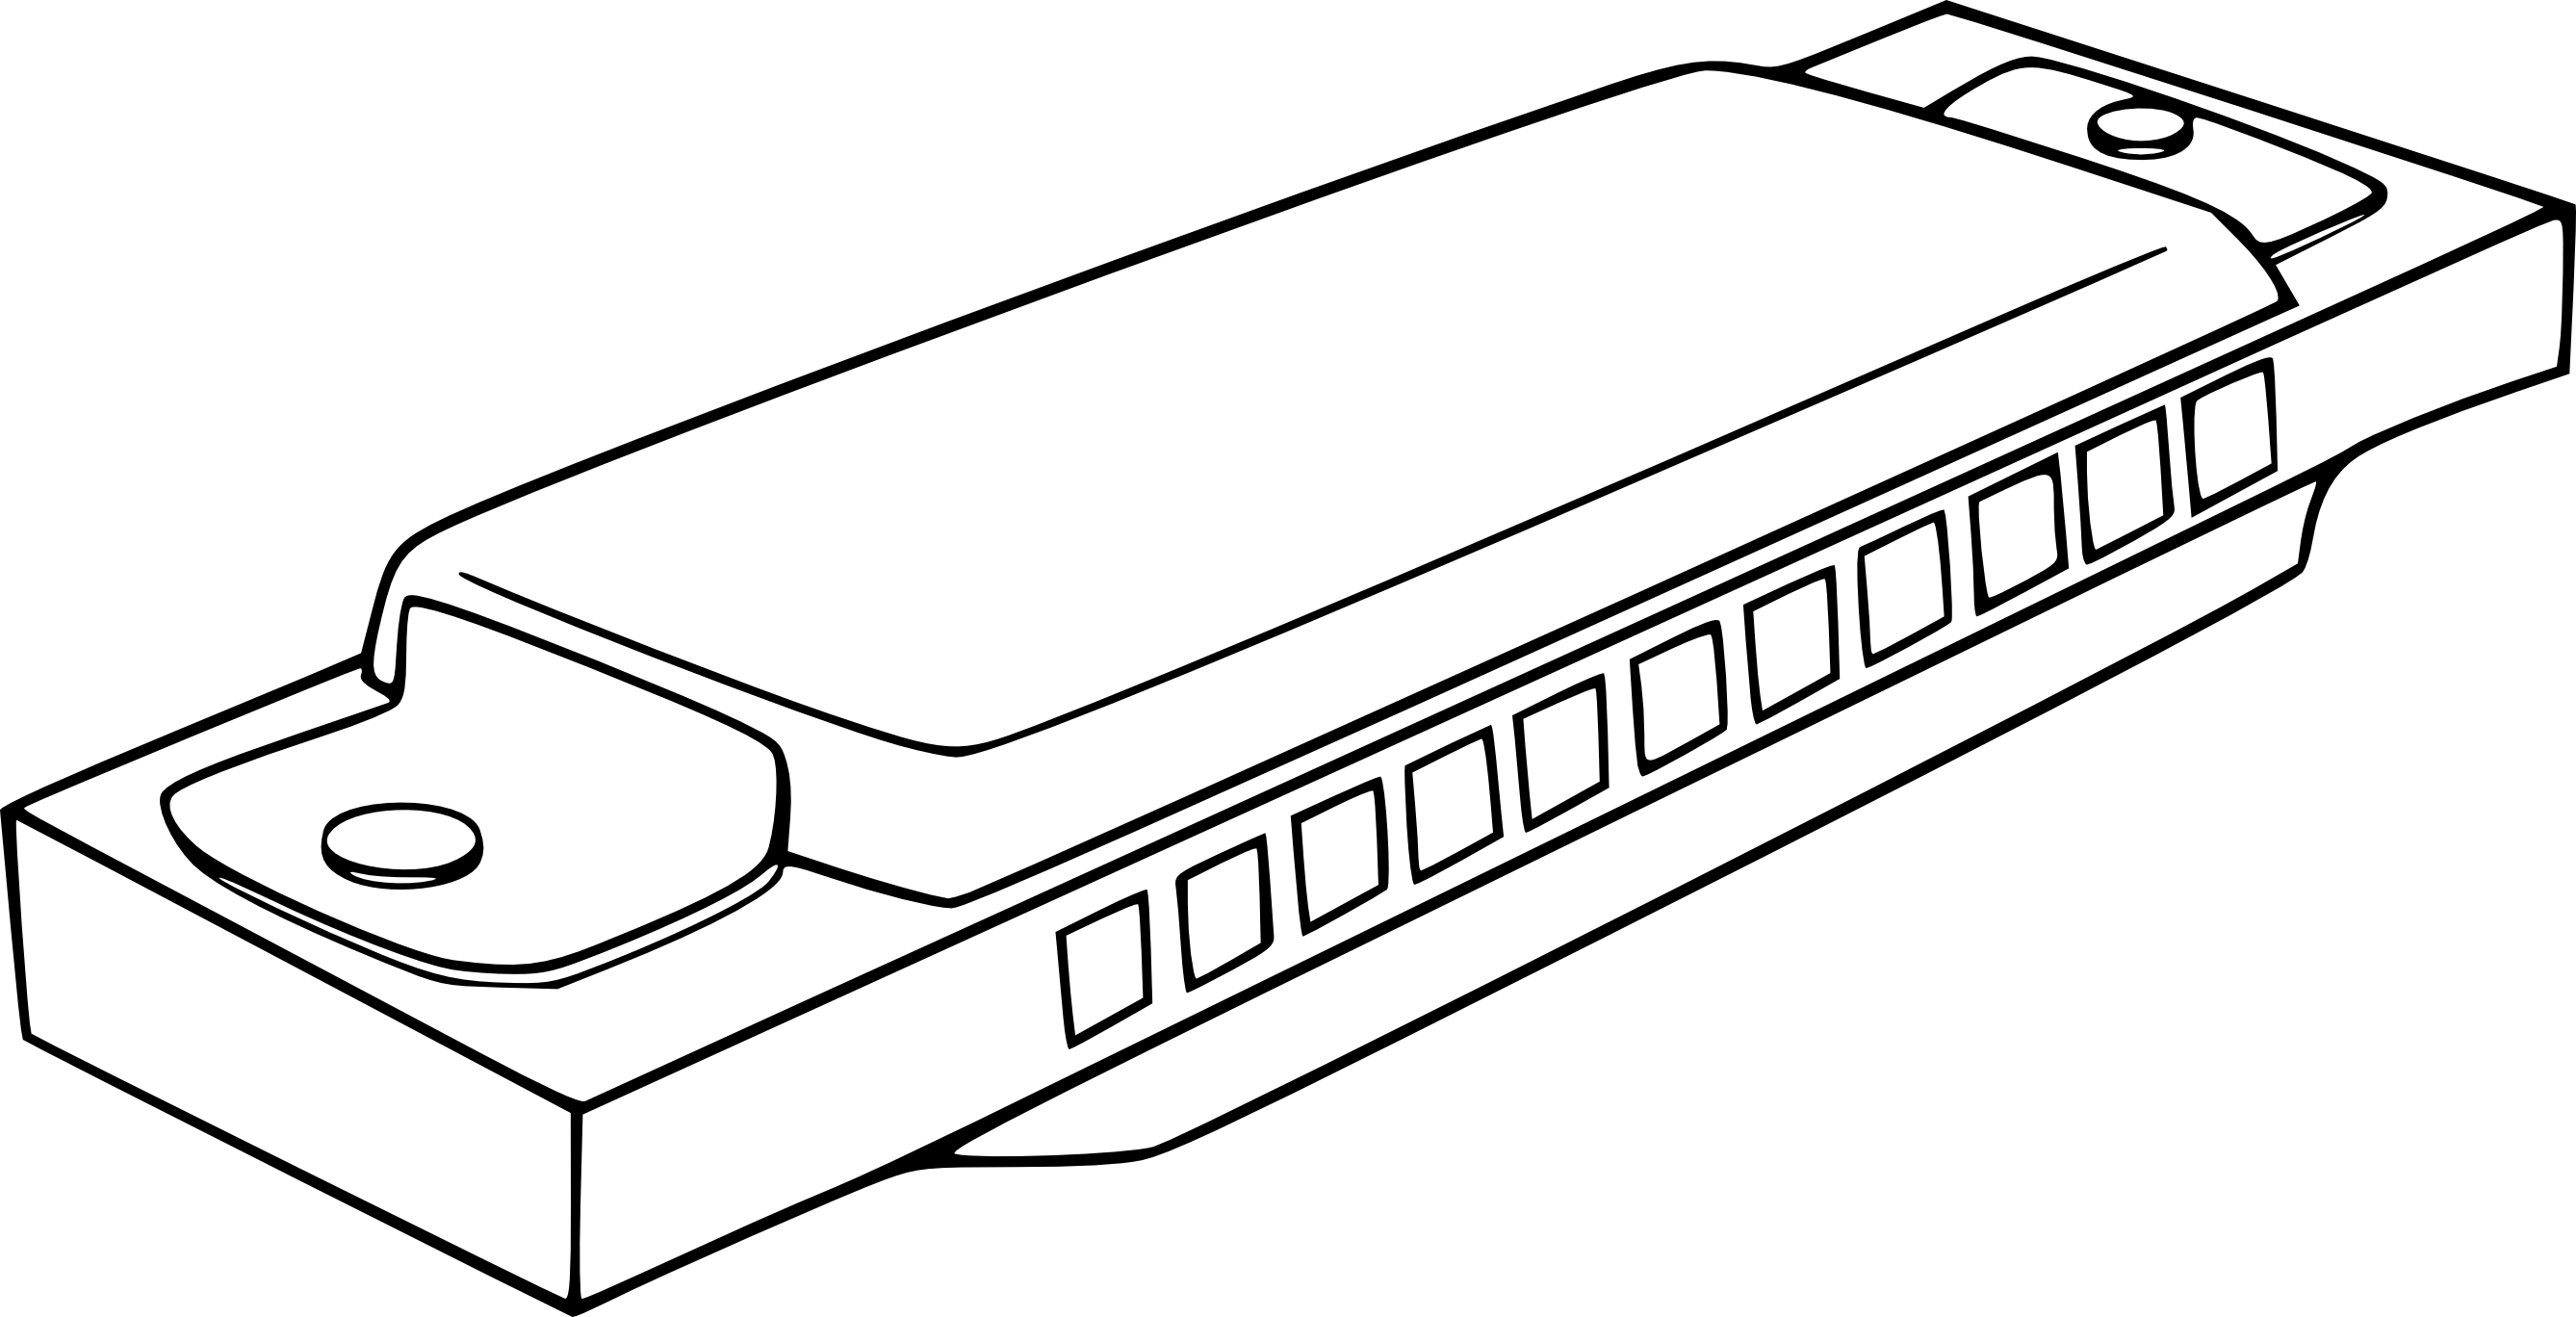 Harmonica coloring page